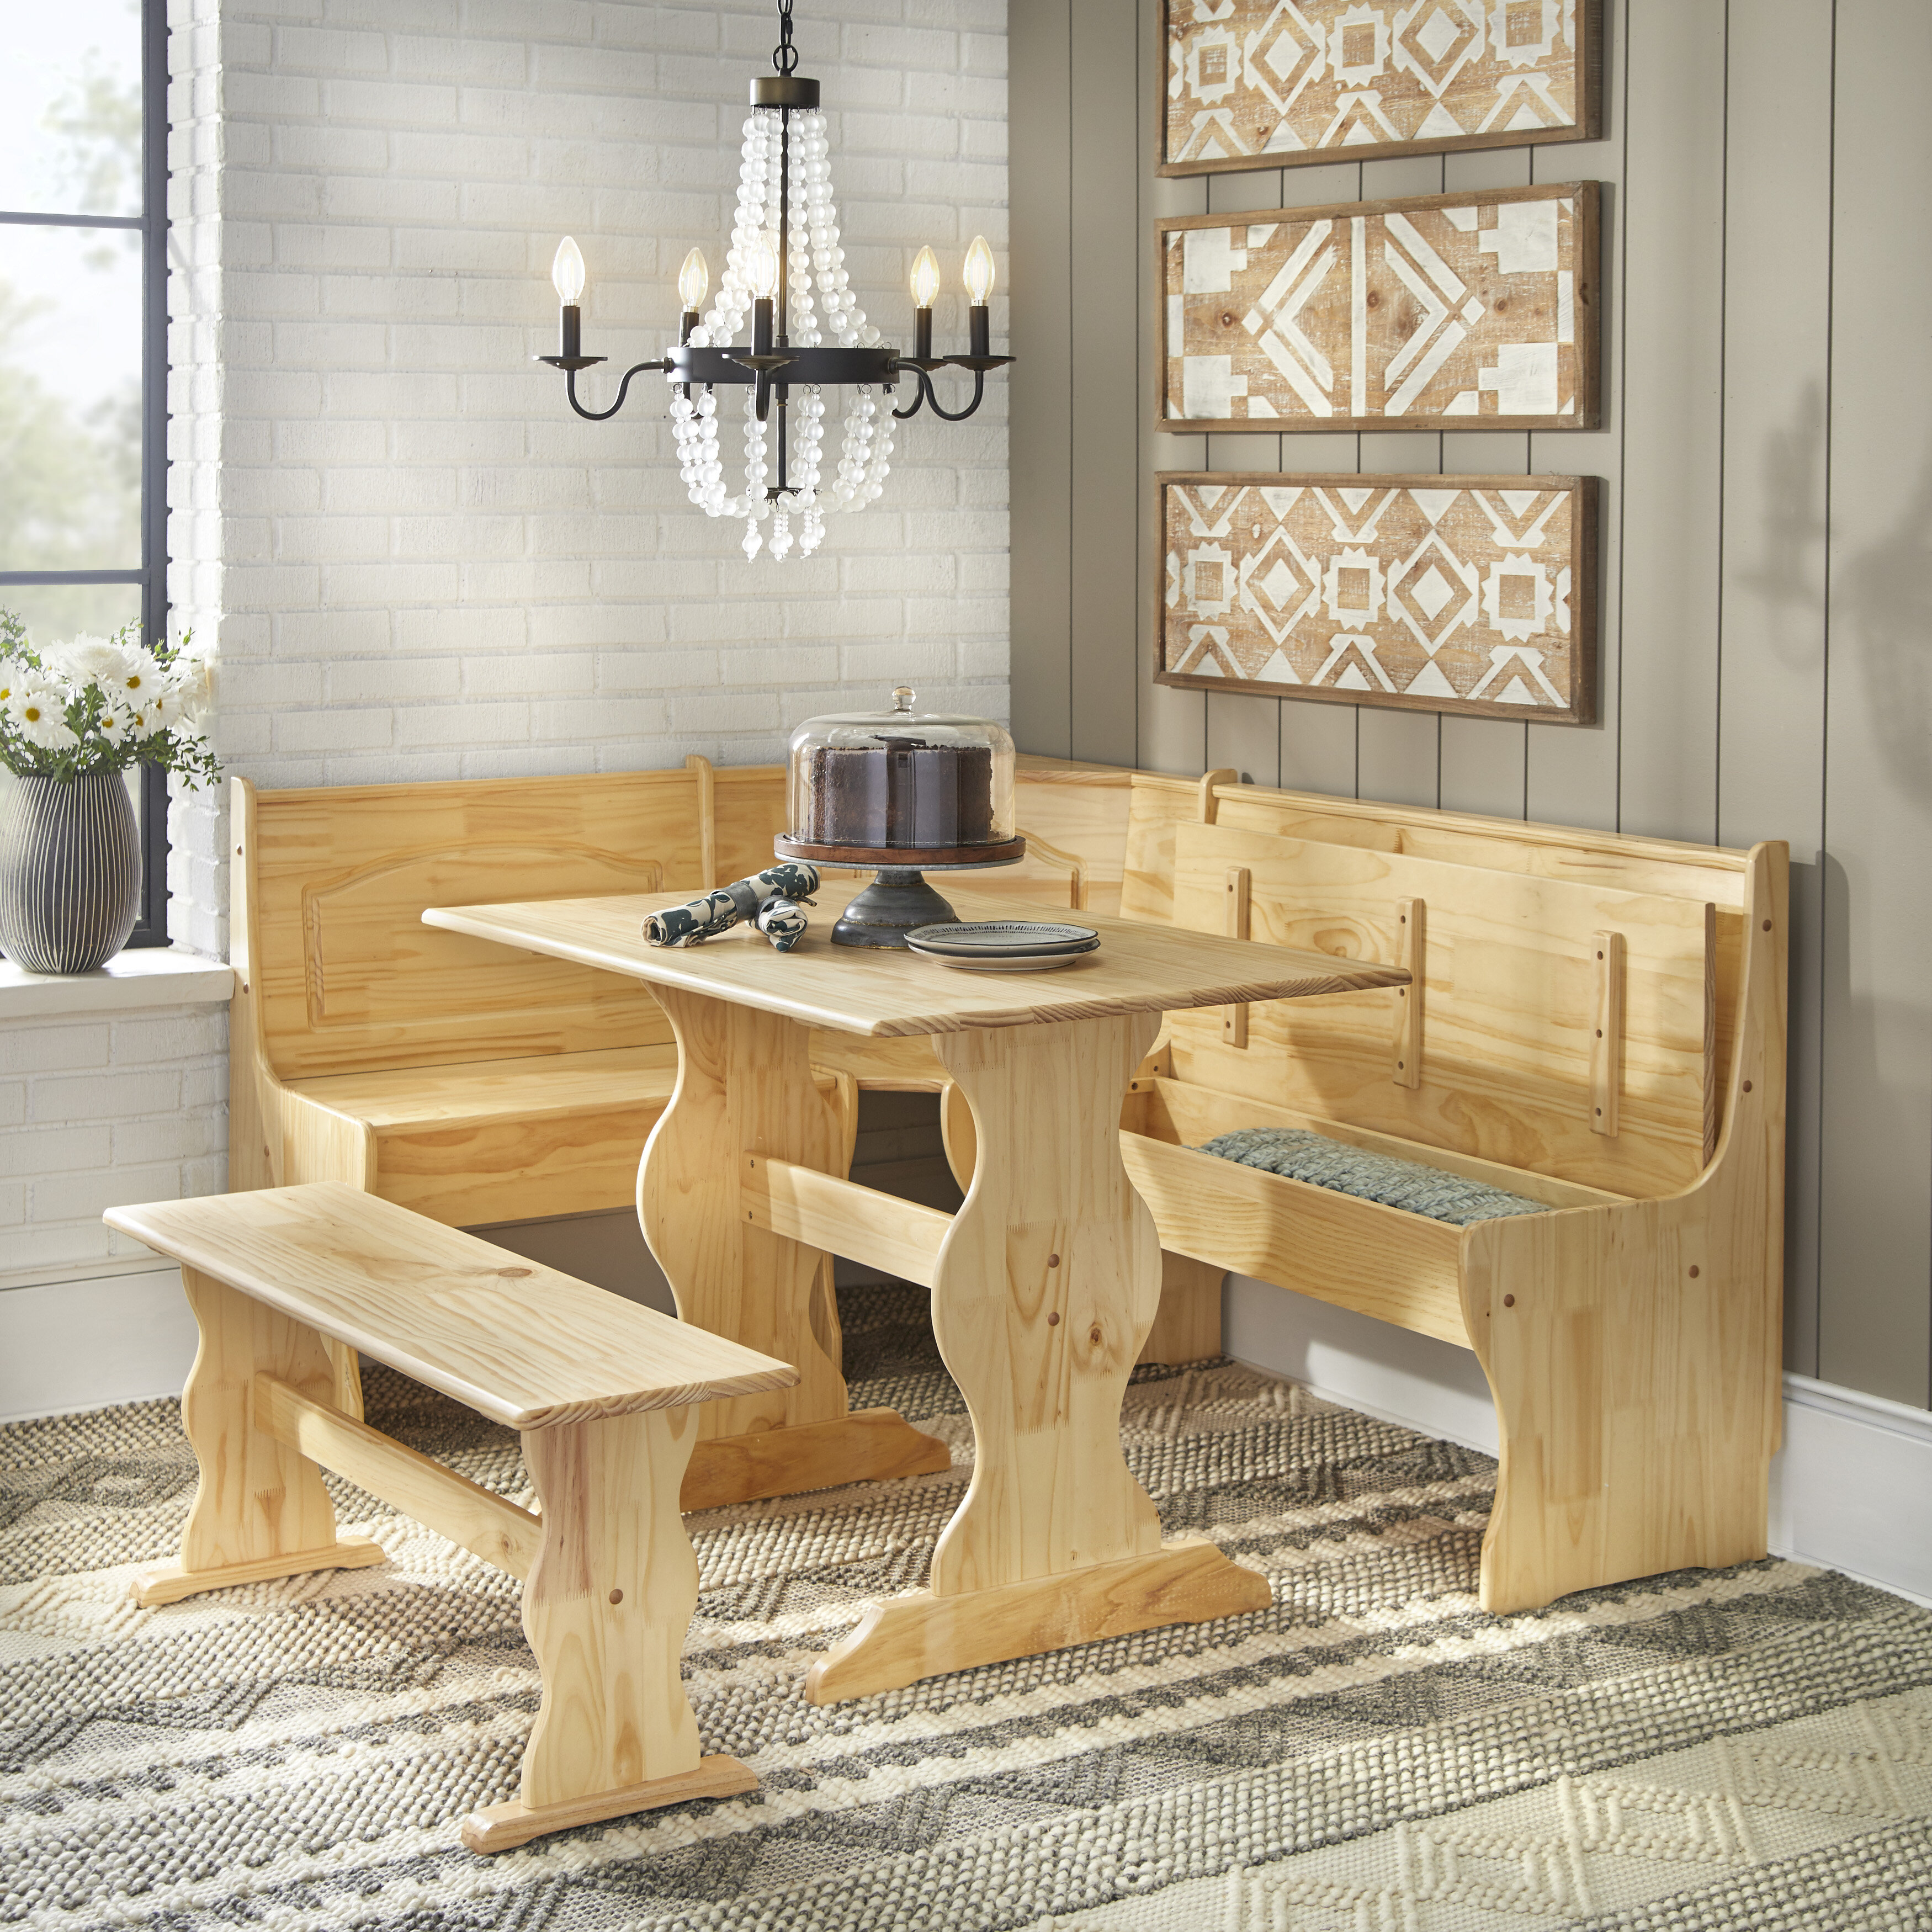 5 Piece Kitchen & Dining Room Sets You'll Love - Wayfair Canada